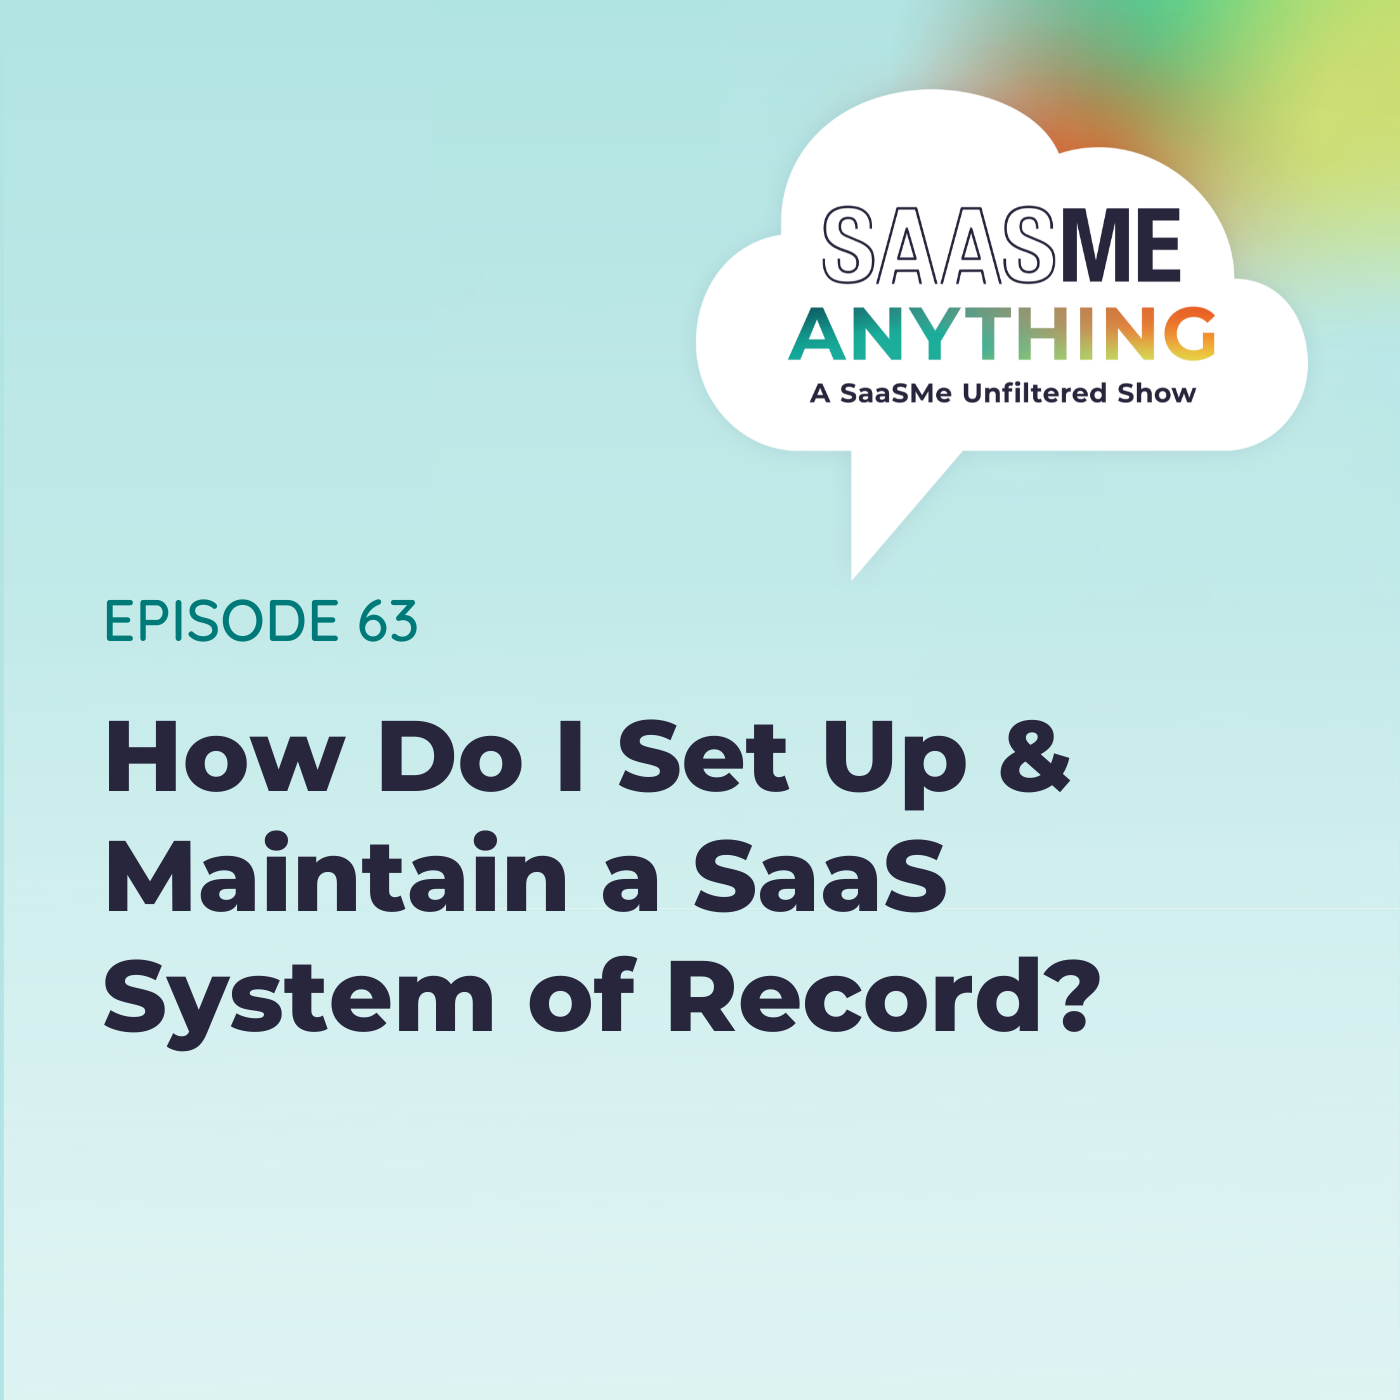 How Do I Set Up & Maintain A SaaS System of Record?